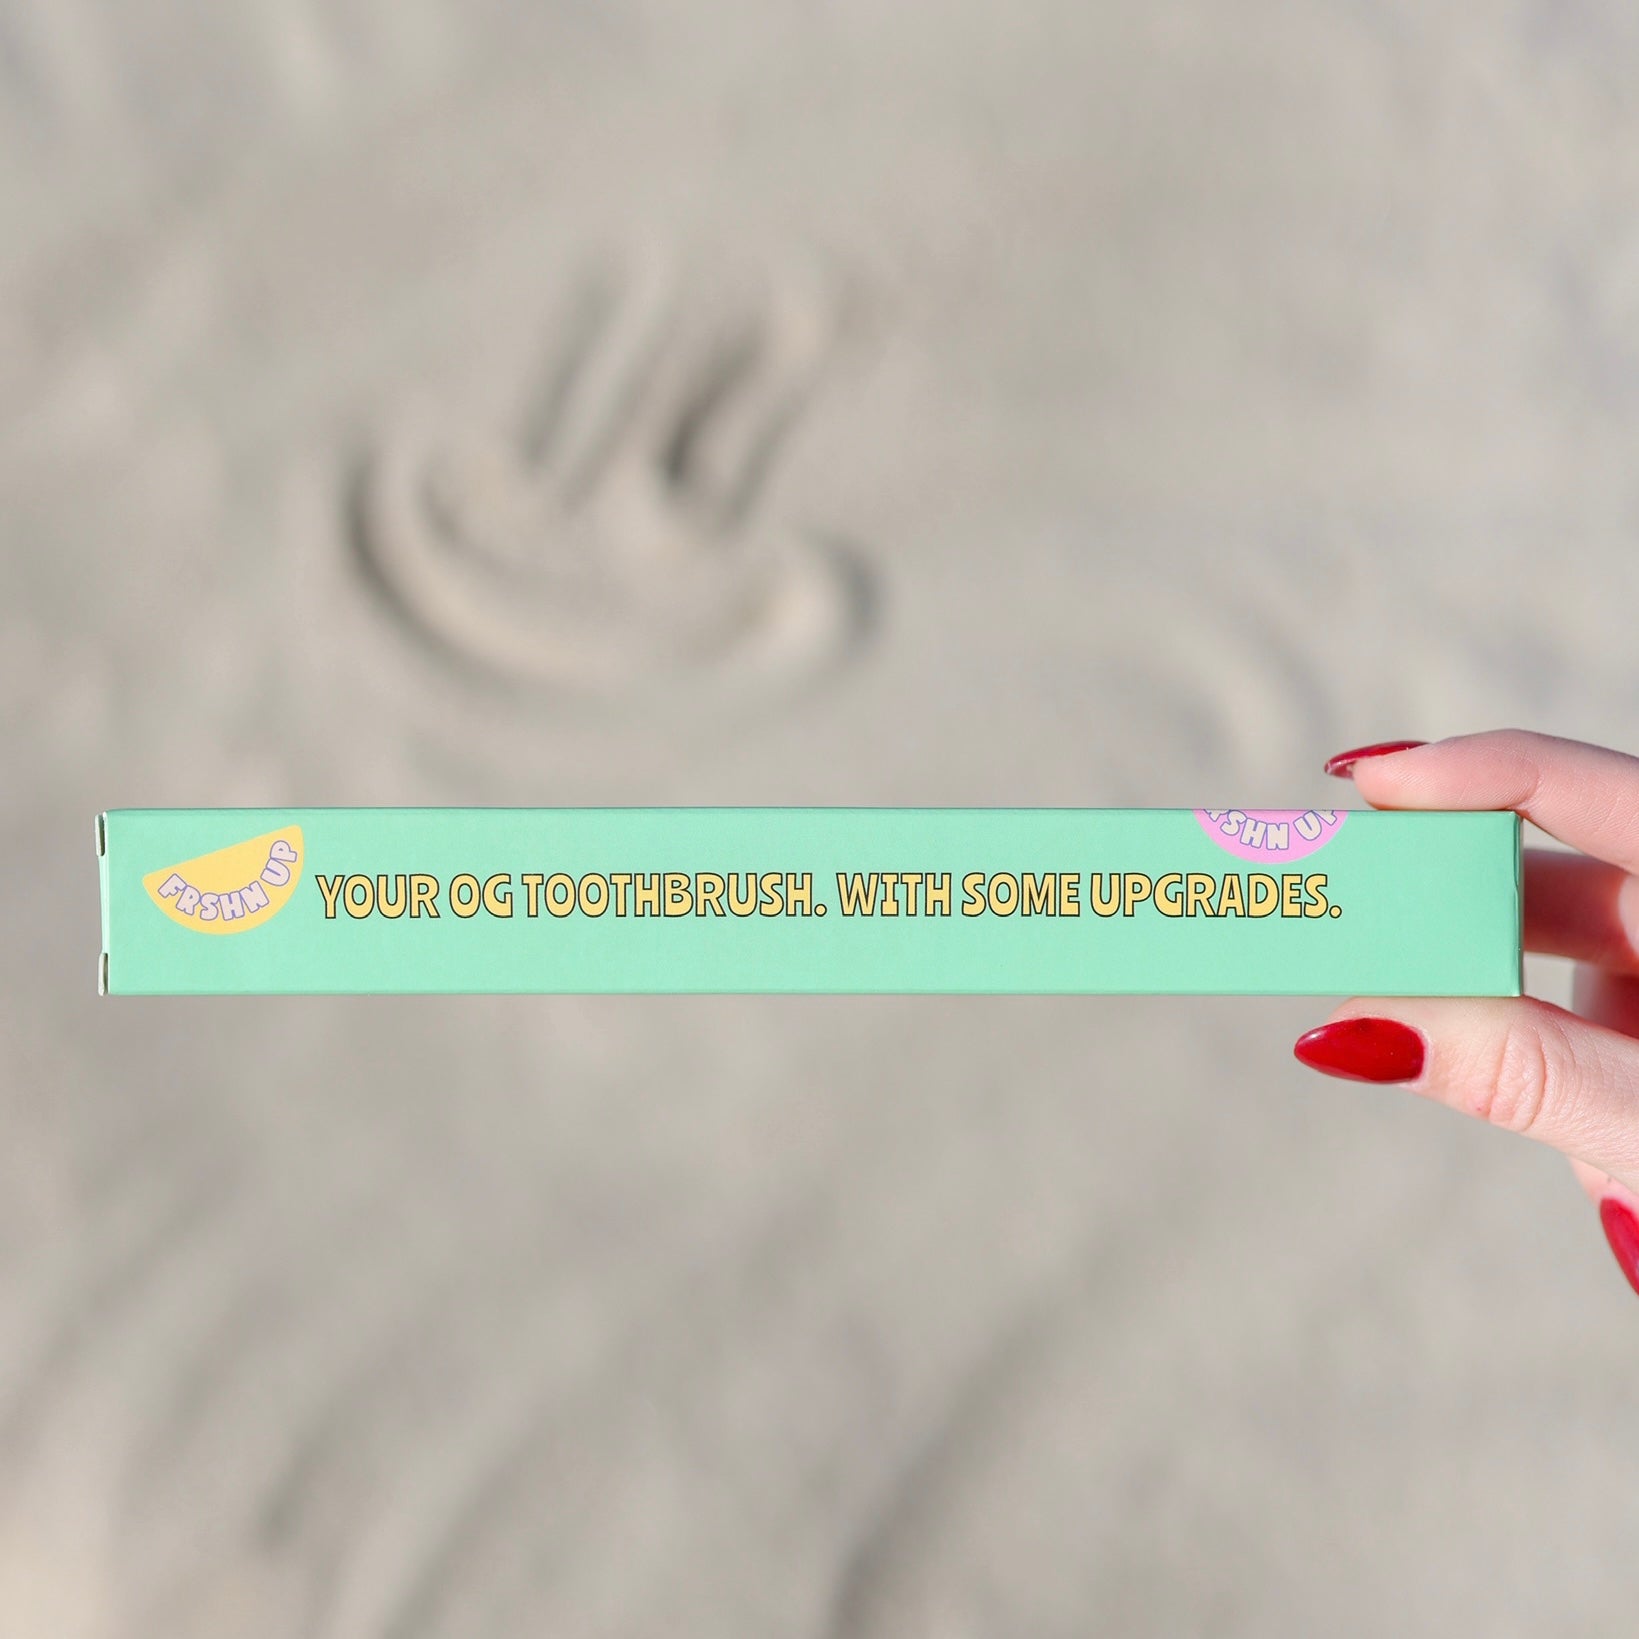 A hand holding an FRSHN UP eco-friendly toothbrush box with the text "your OG Toothbrush. With some upgrades.